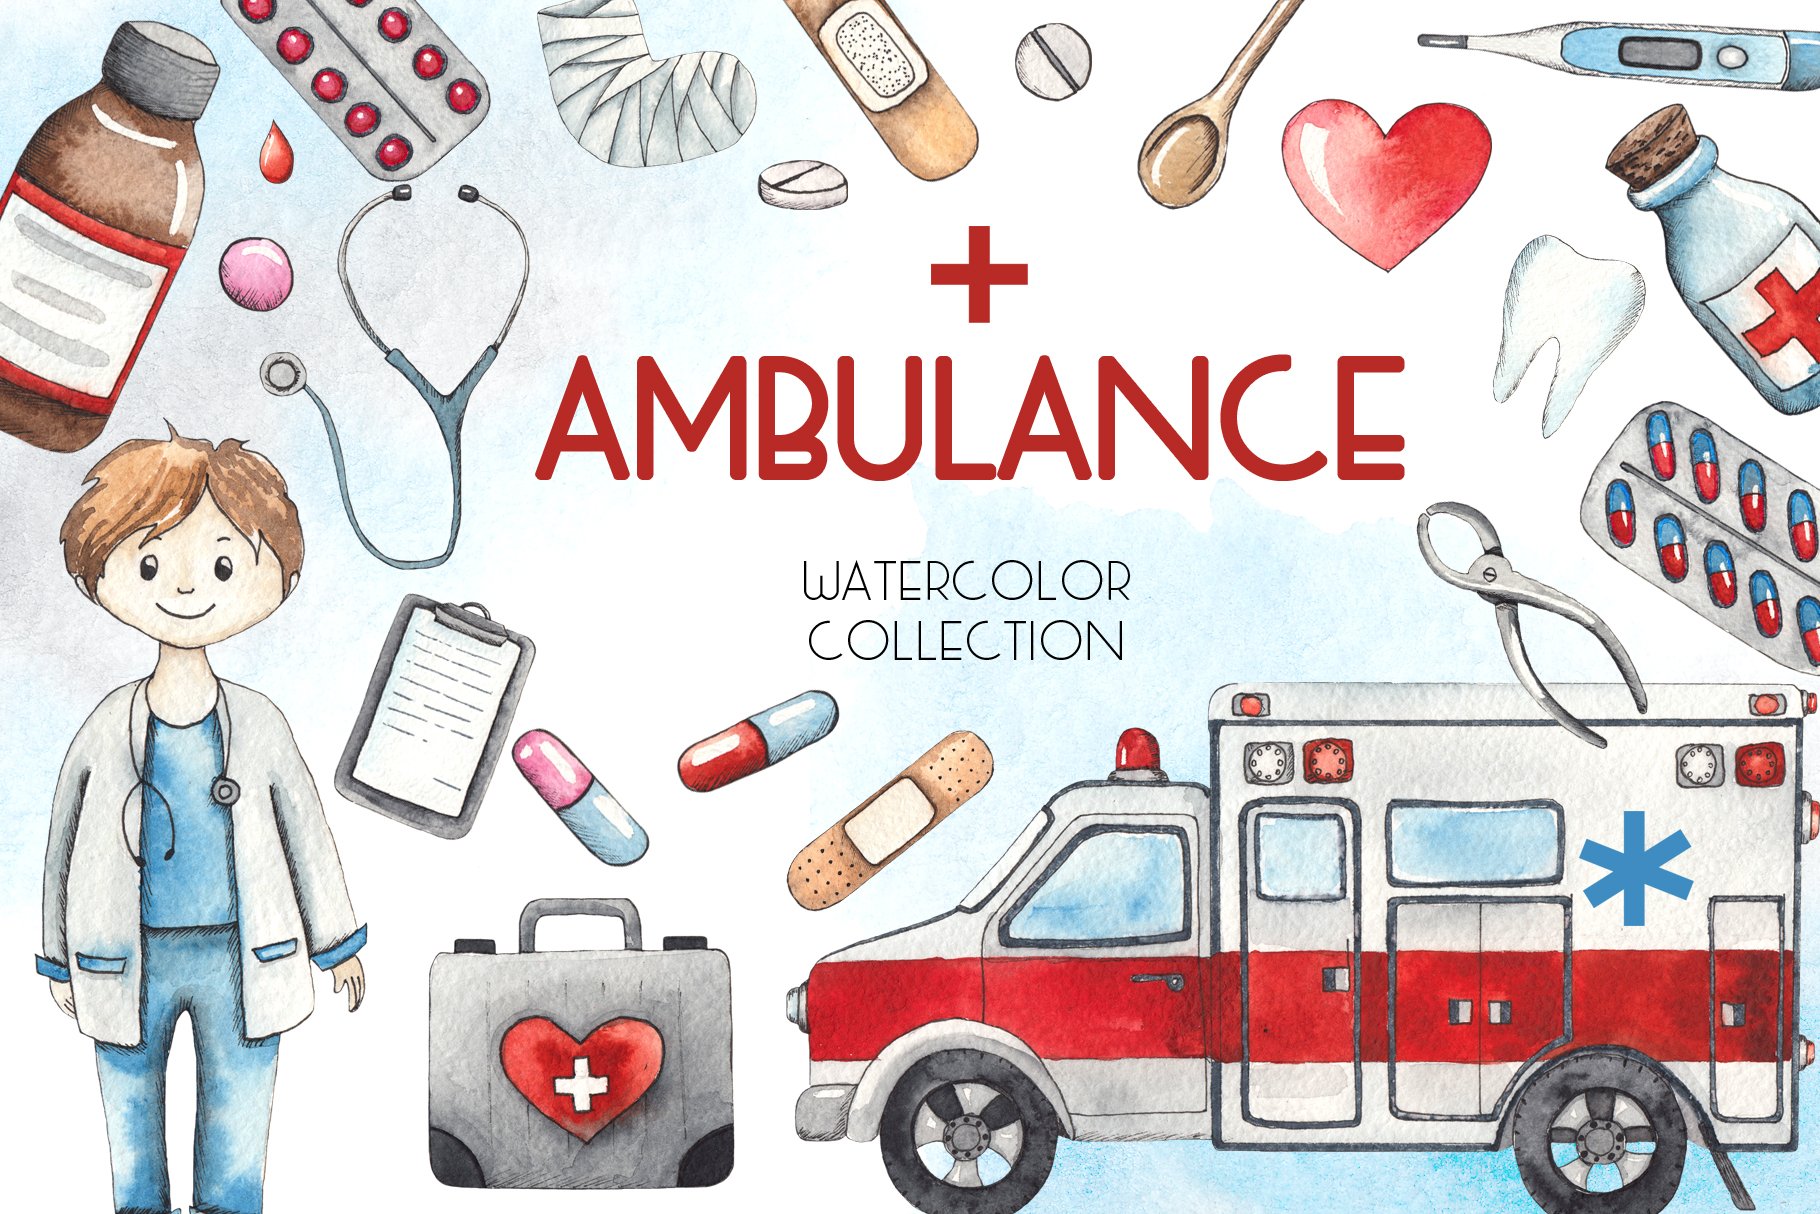 Ambulance. Watercolor collection cover image.